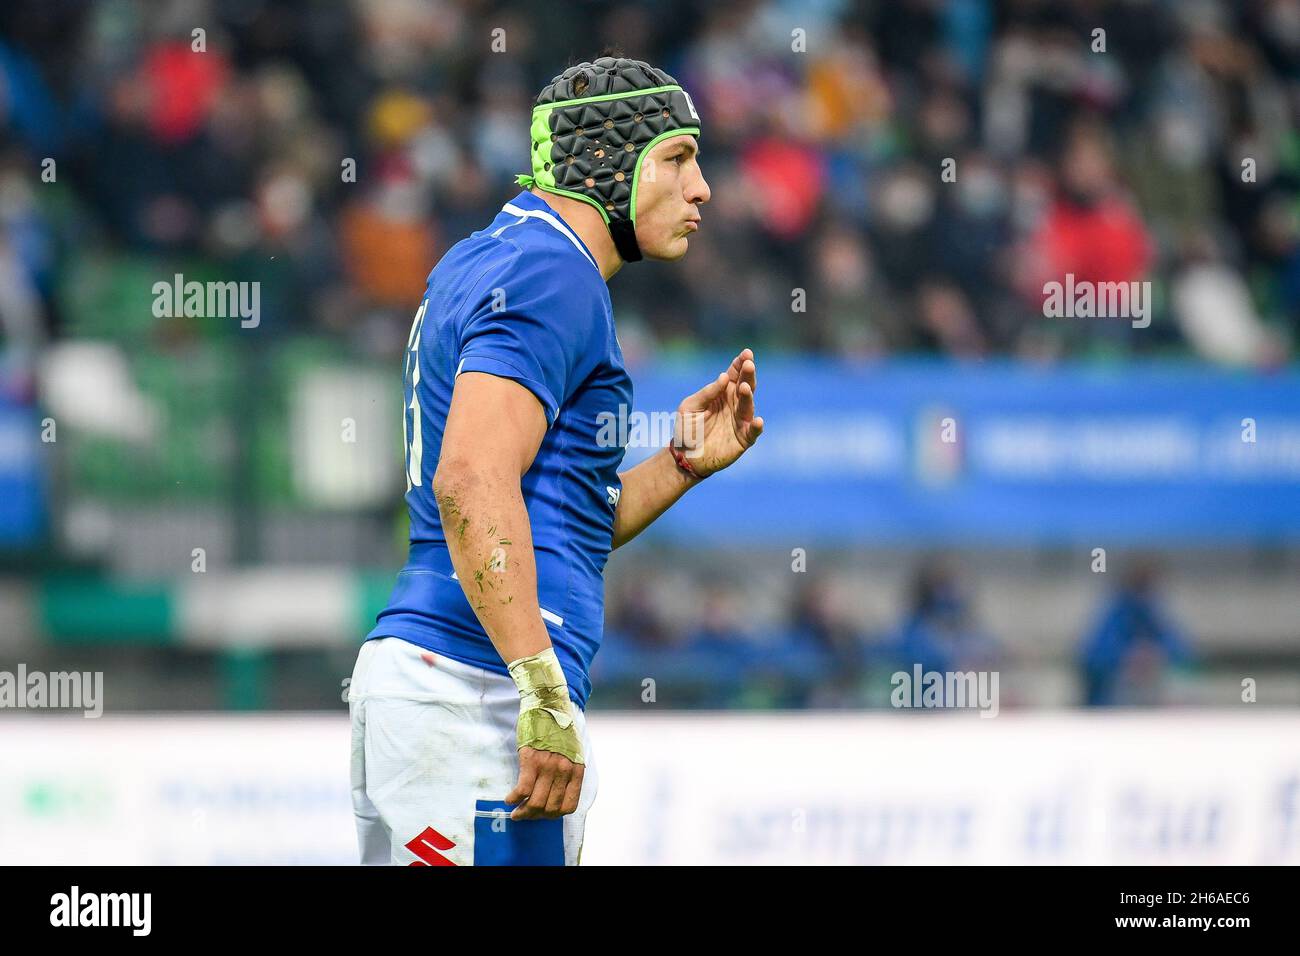 Treviso, Italy. 13th Nov, 2021. Juan Ignacio Brex (Italy) portrait during Test Match 2021, Italy vs Argentina, Autumn Nations Cup rugby match in Treviso, Italy, November 13 2021 Credit: Independent Photo Agency/Alamy Live News Stock Photo